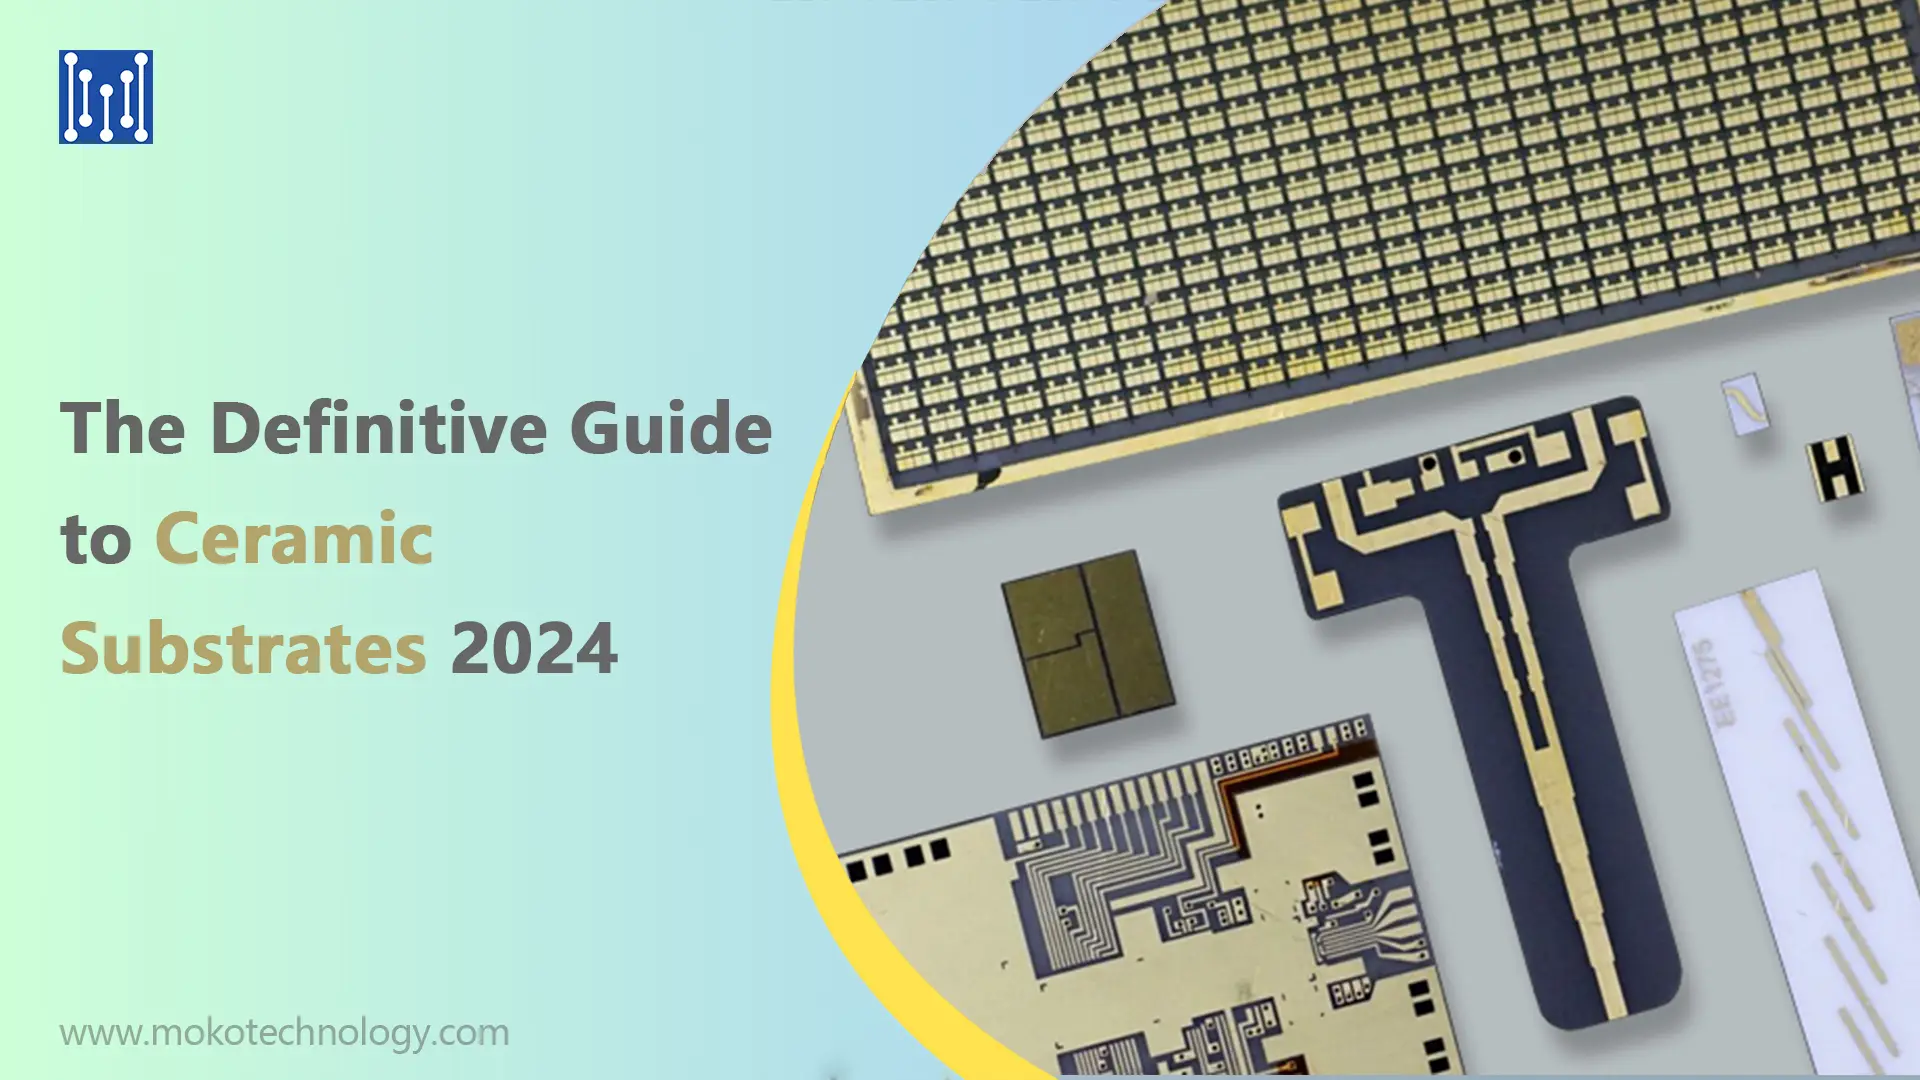 The Definitive Guide to Ceramic Substrates 2024